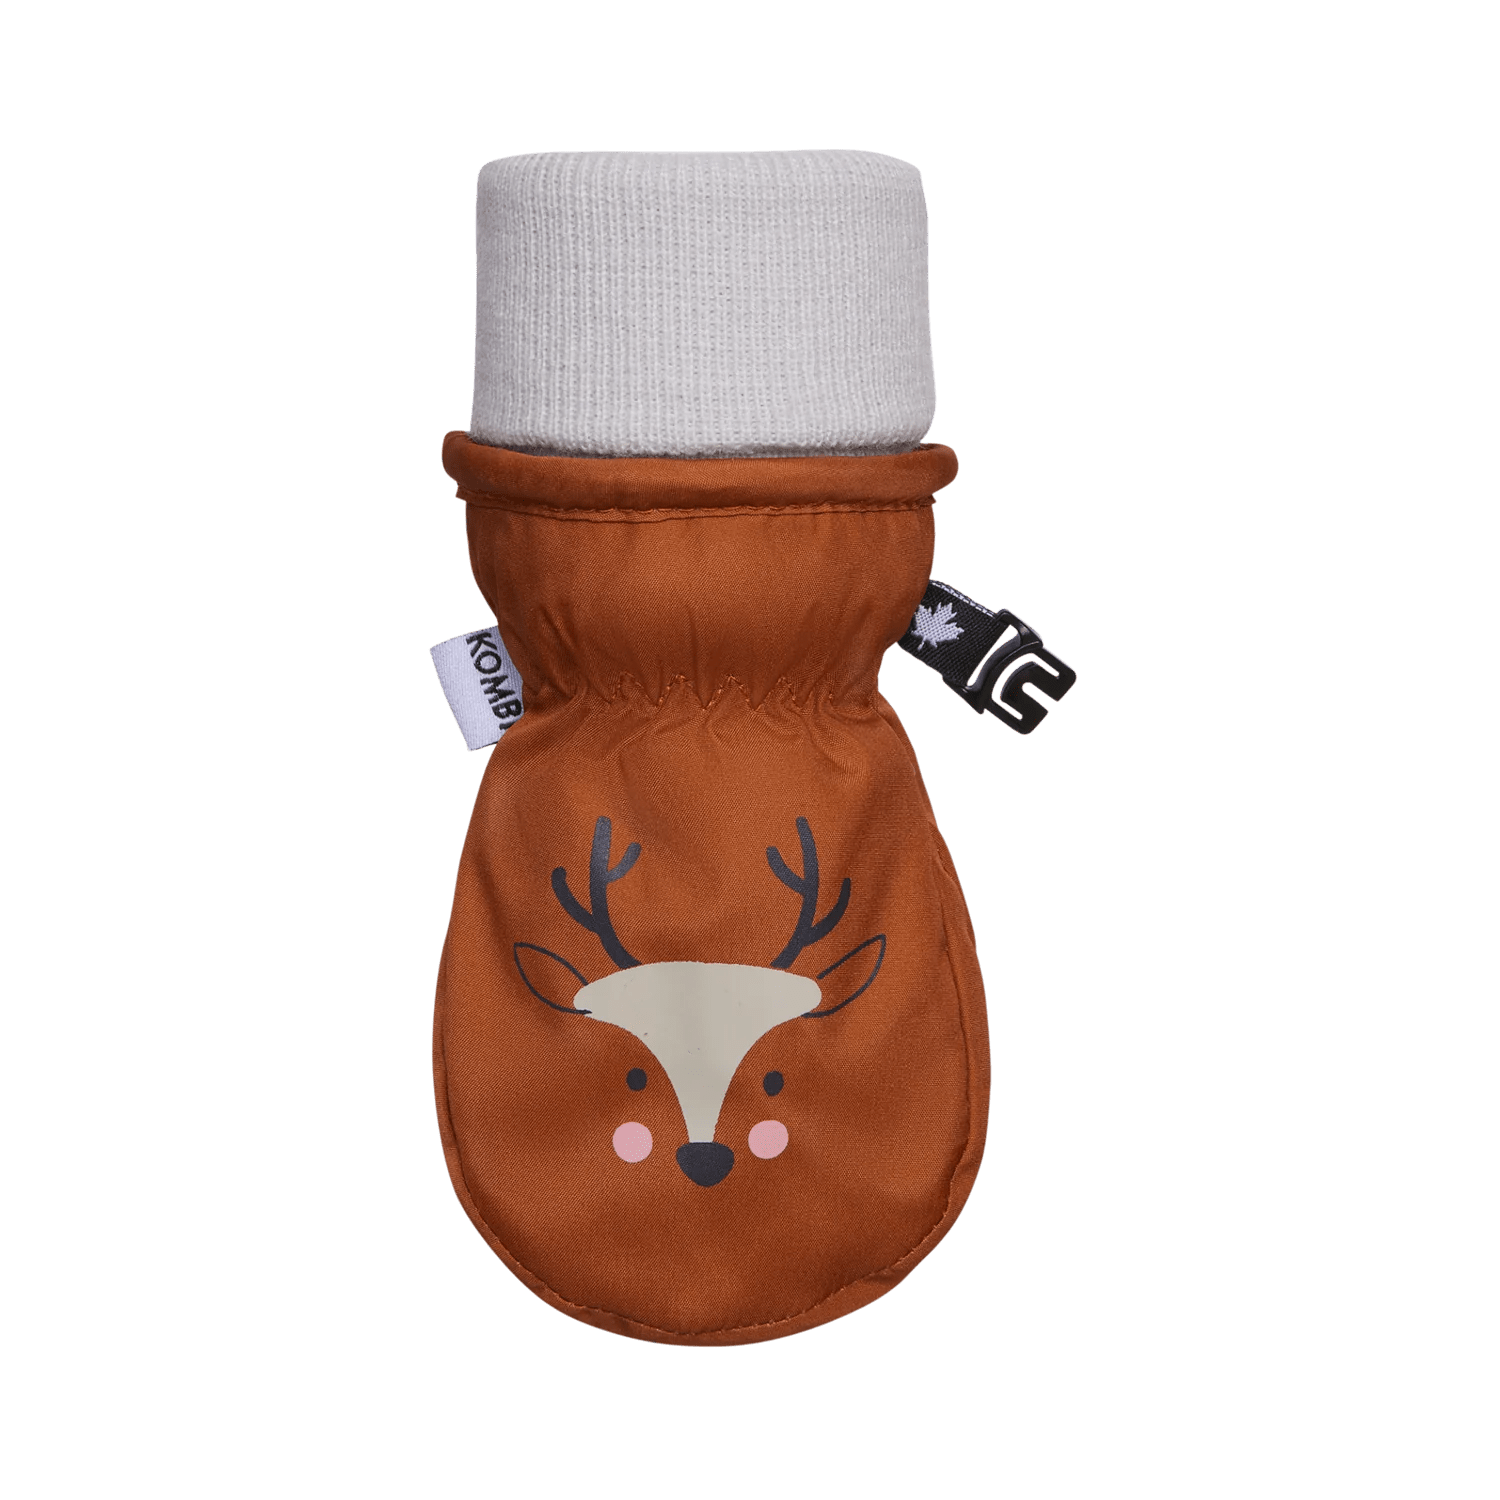 Kombi The Baby Animal Infant Mitt - Mountain Kids Outfitters